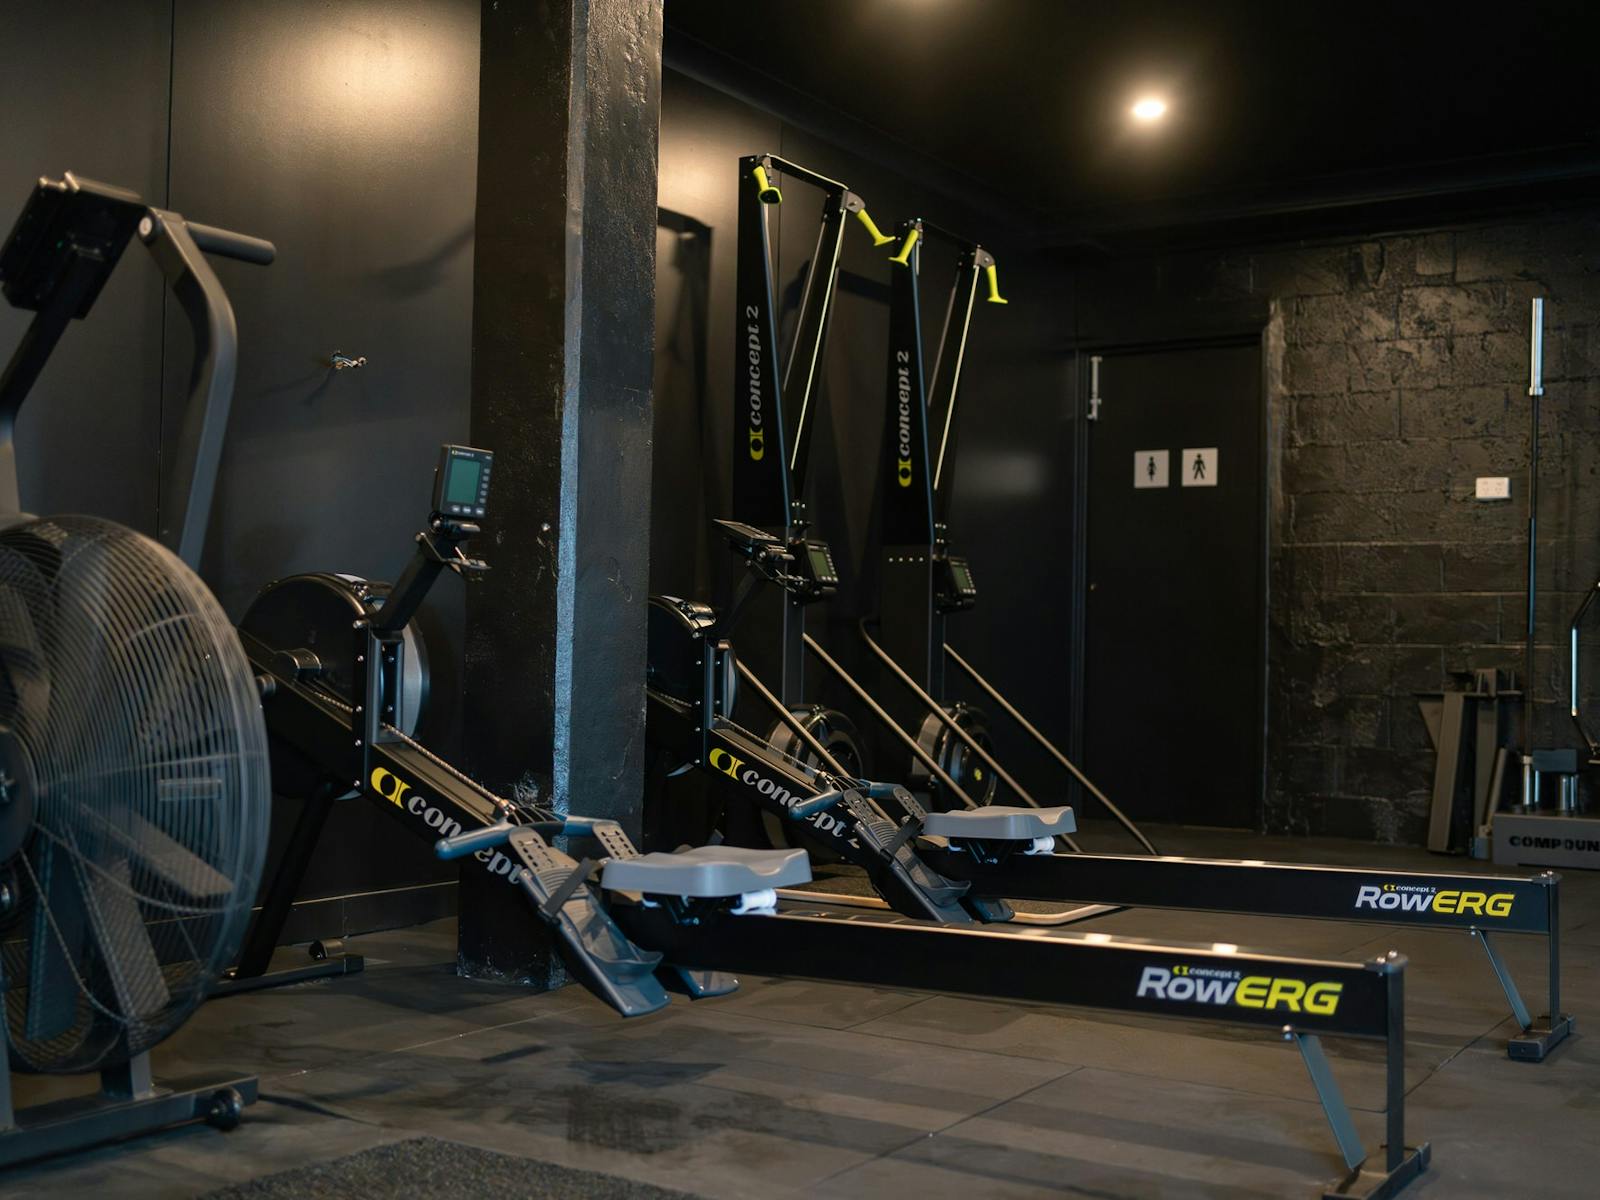 Assult bikes, Concept 2 Ski Ergs and rowers